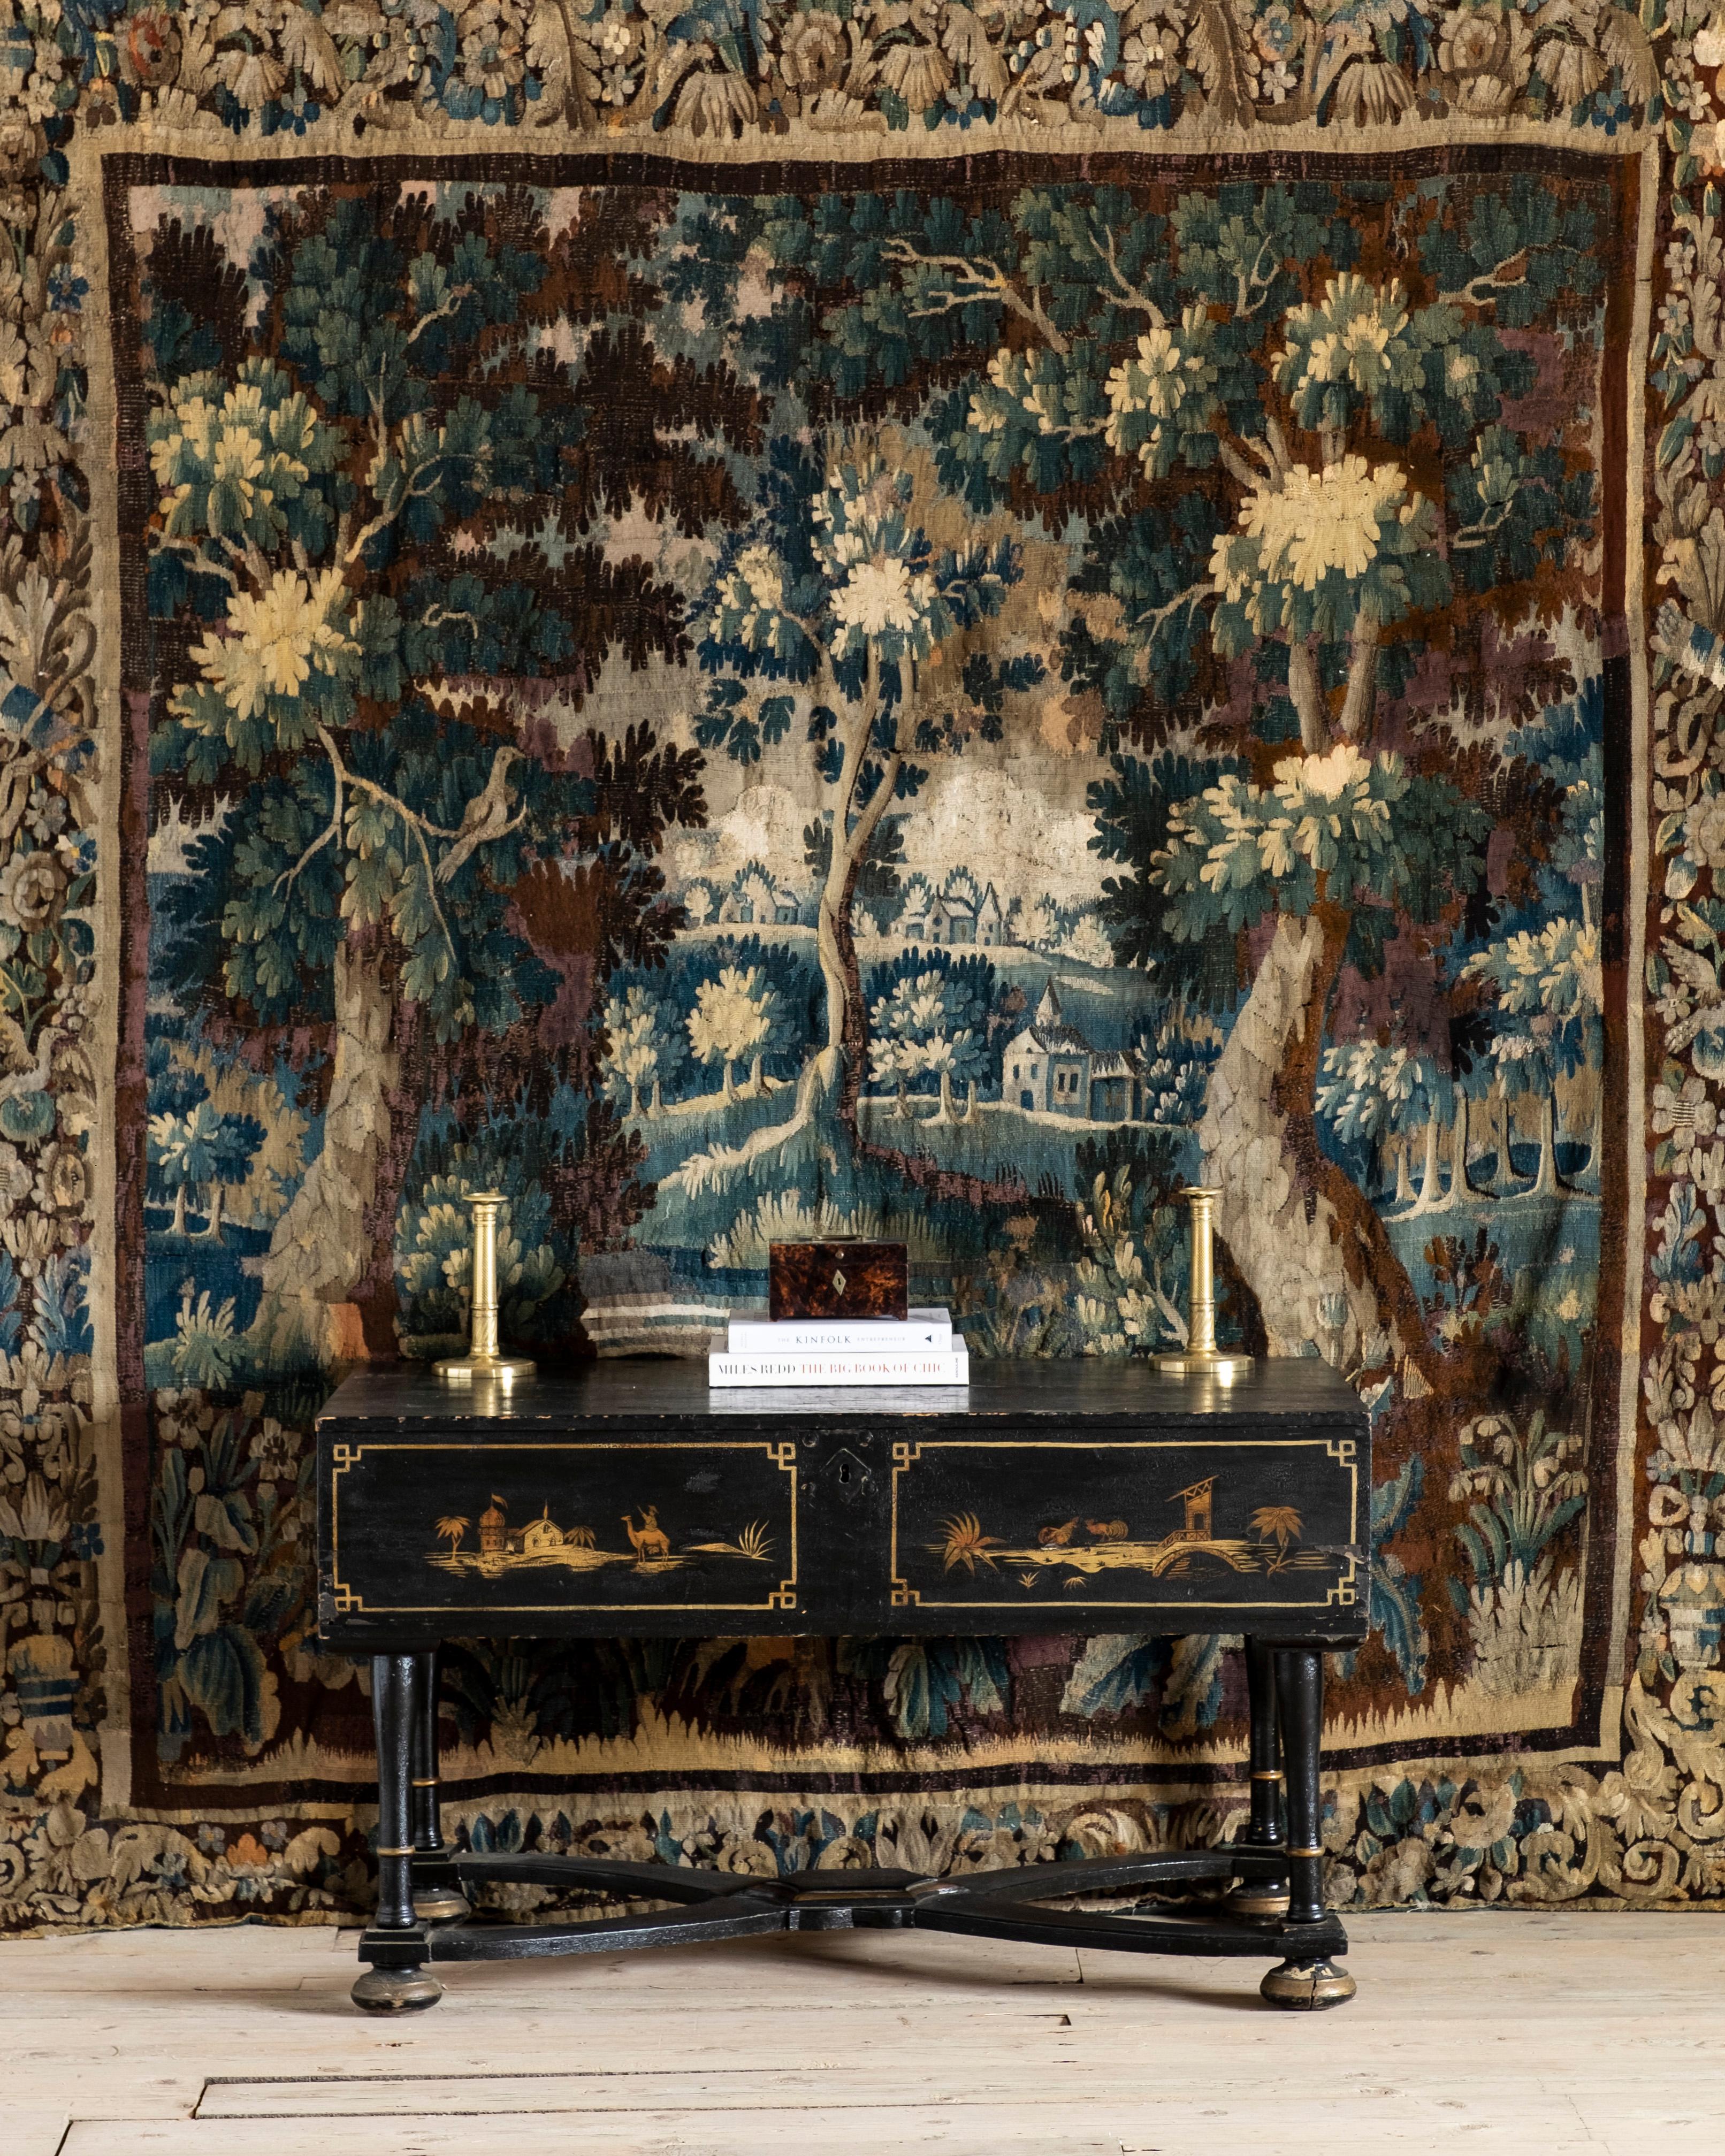 Fine early 18th century Flemish “Verdure” Tapestry finely woven in wool and silk. With trees, plants, houses and a bird in a wooded landscape surrounded by a richly decorated border. Good colors in predominantly blues, greens, and pale yellows,